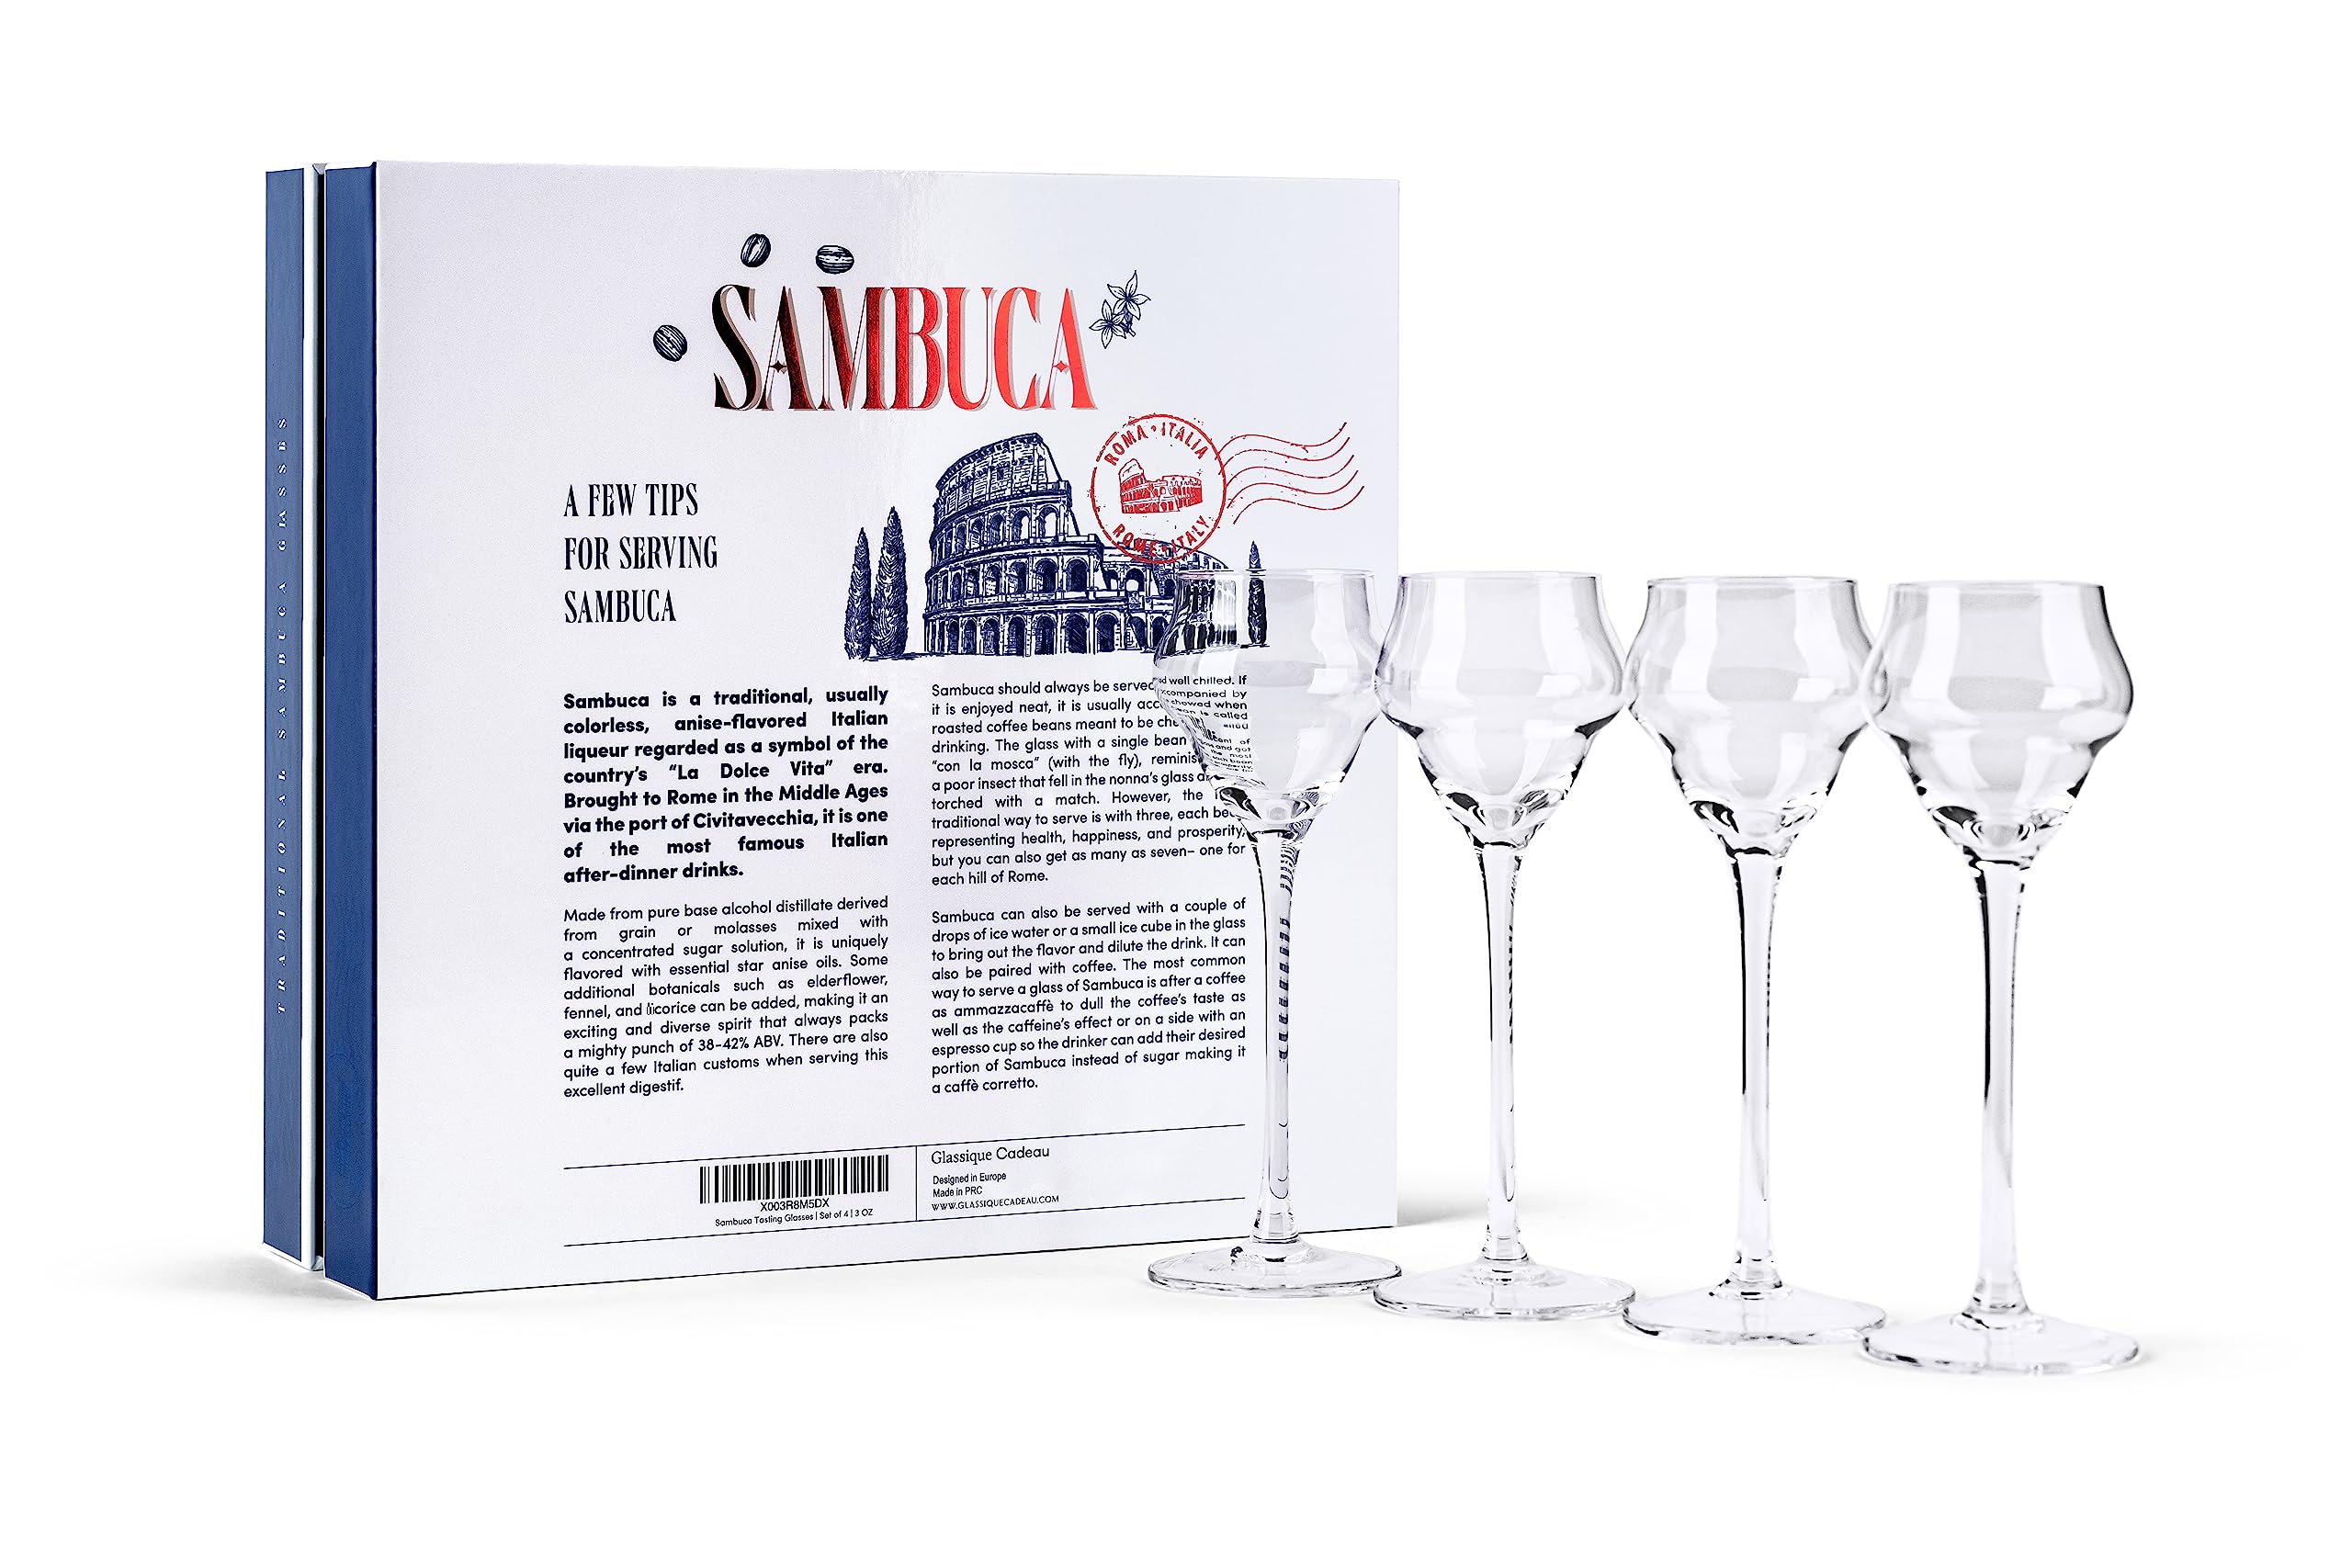 GLASSIQUE CADEAU Crystal Sambuca, Cordial, Digestive Glasses with Long Stem for Sipping After Dinner Drinks | Set of 4 | 3 oz Tall Stemmed Liquor Glassware